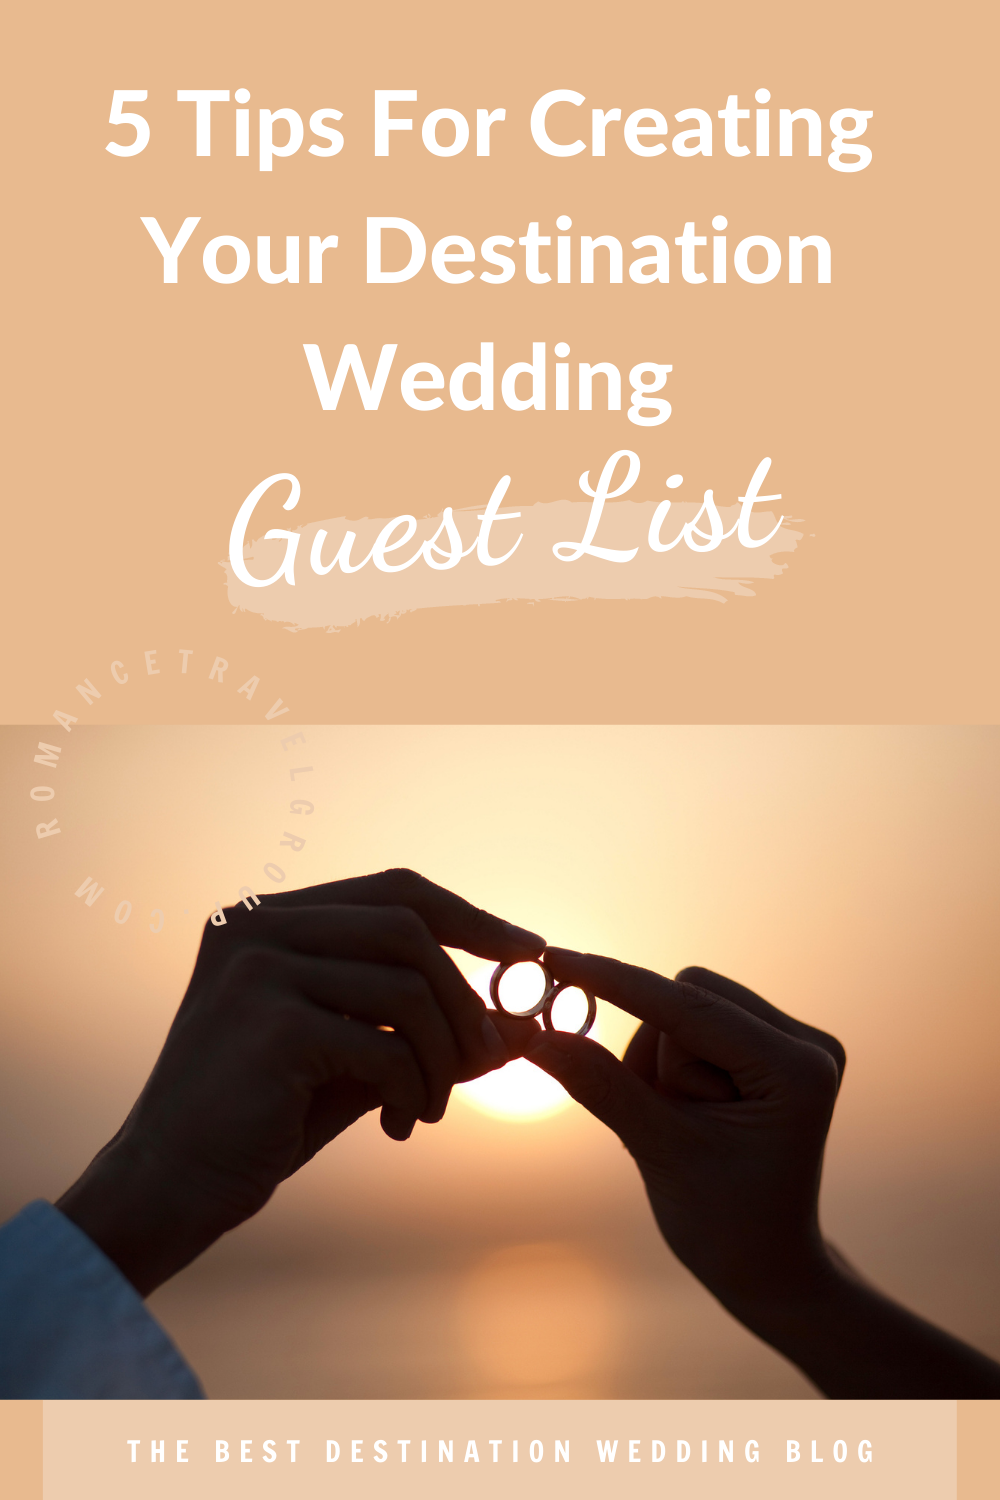 5 Tips For Creating Your Destination Wedding Guest List